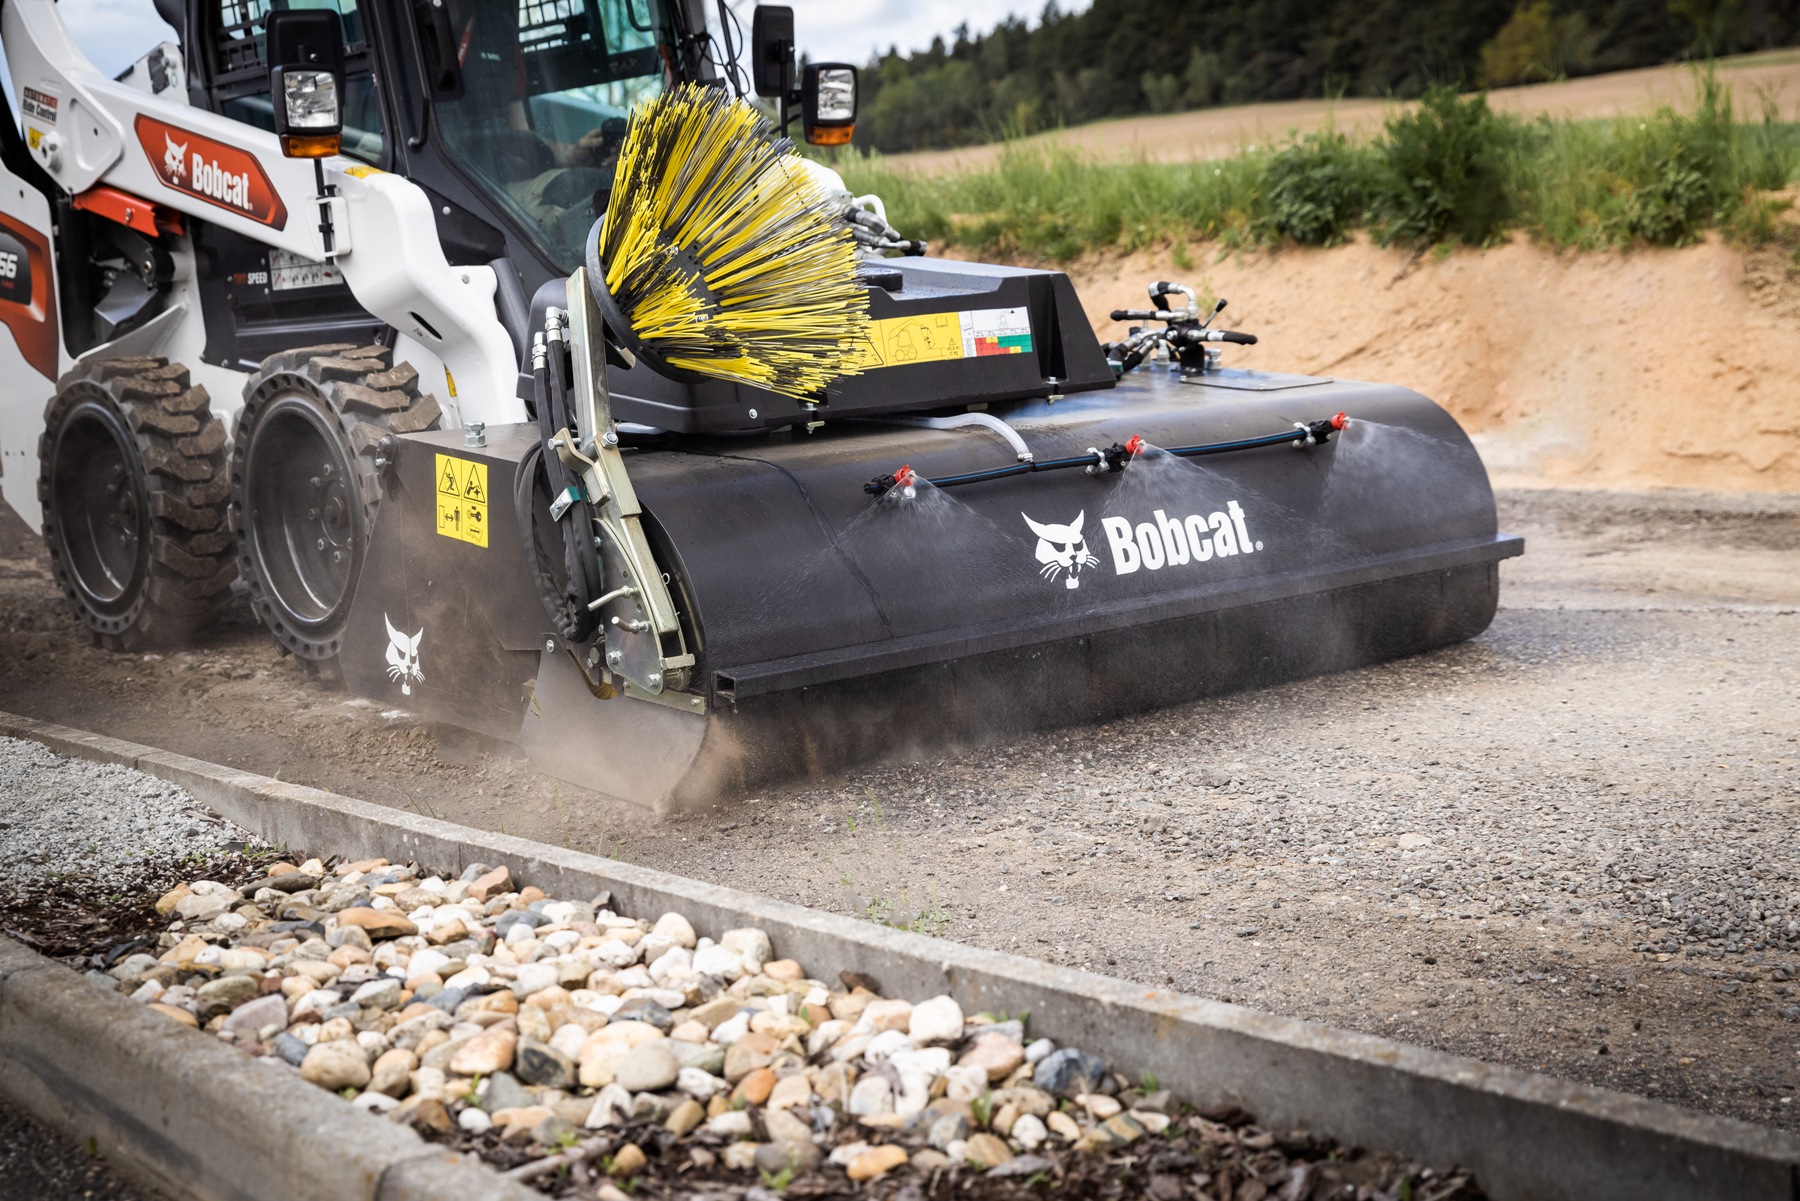 Bobcat launches new range of sweeper attachments